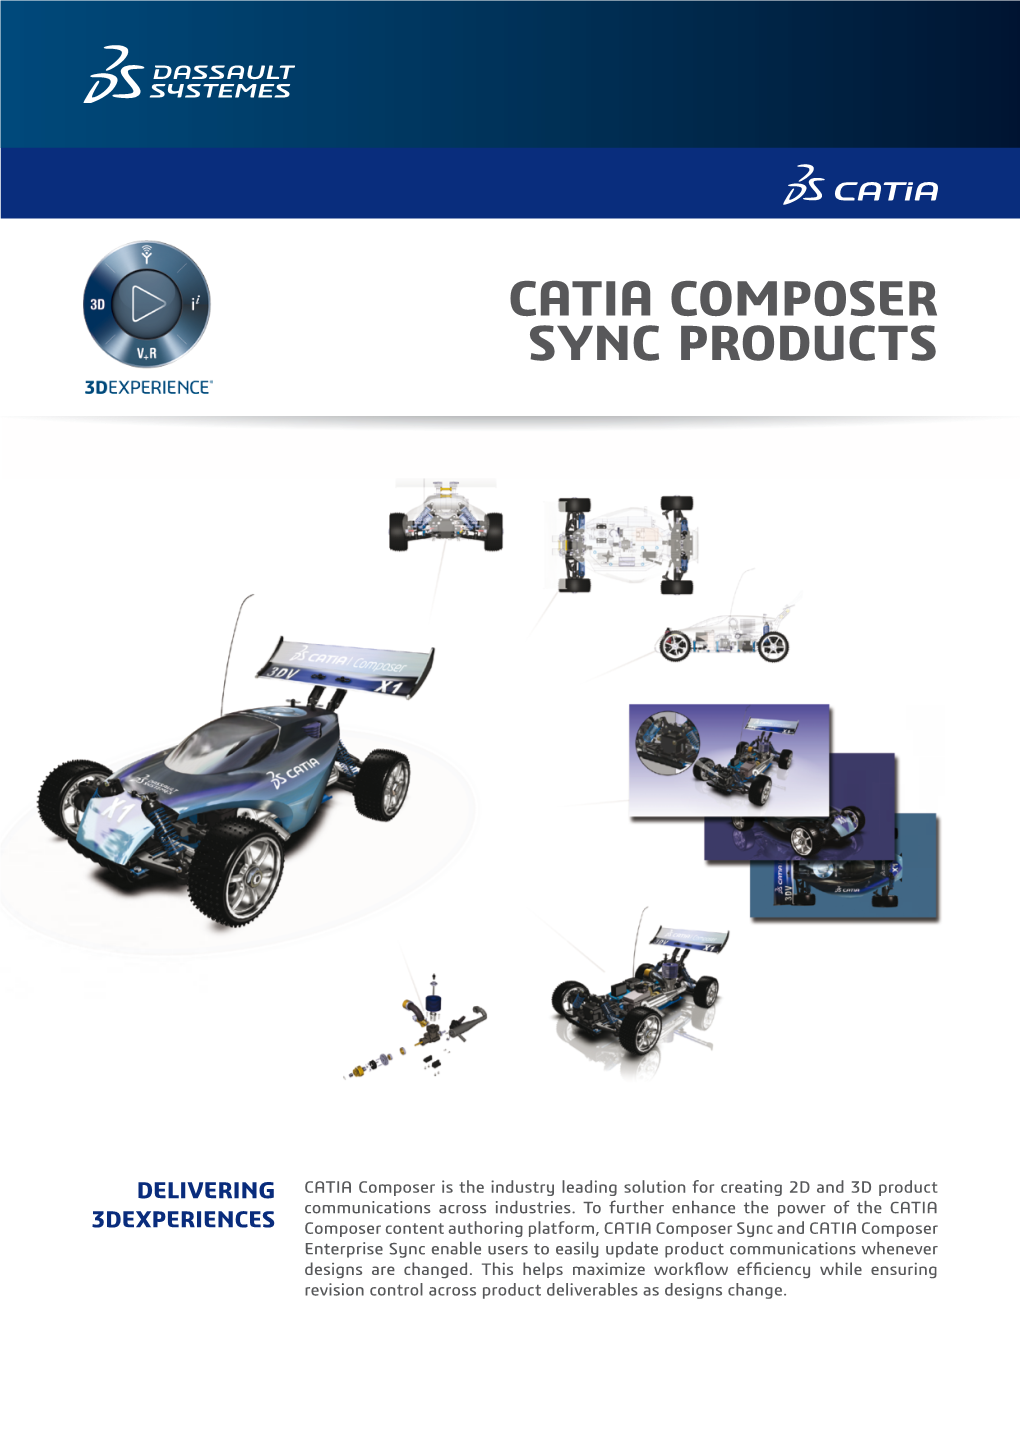 Catia Composer Sync Products